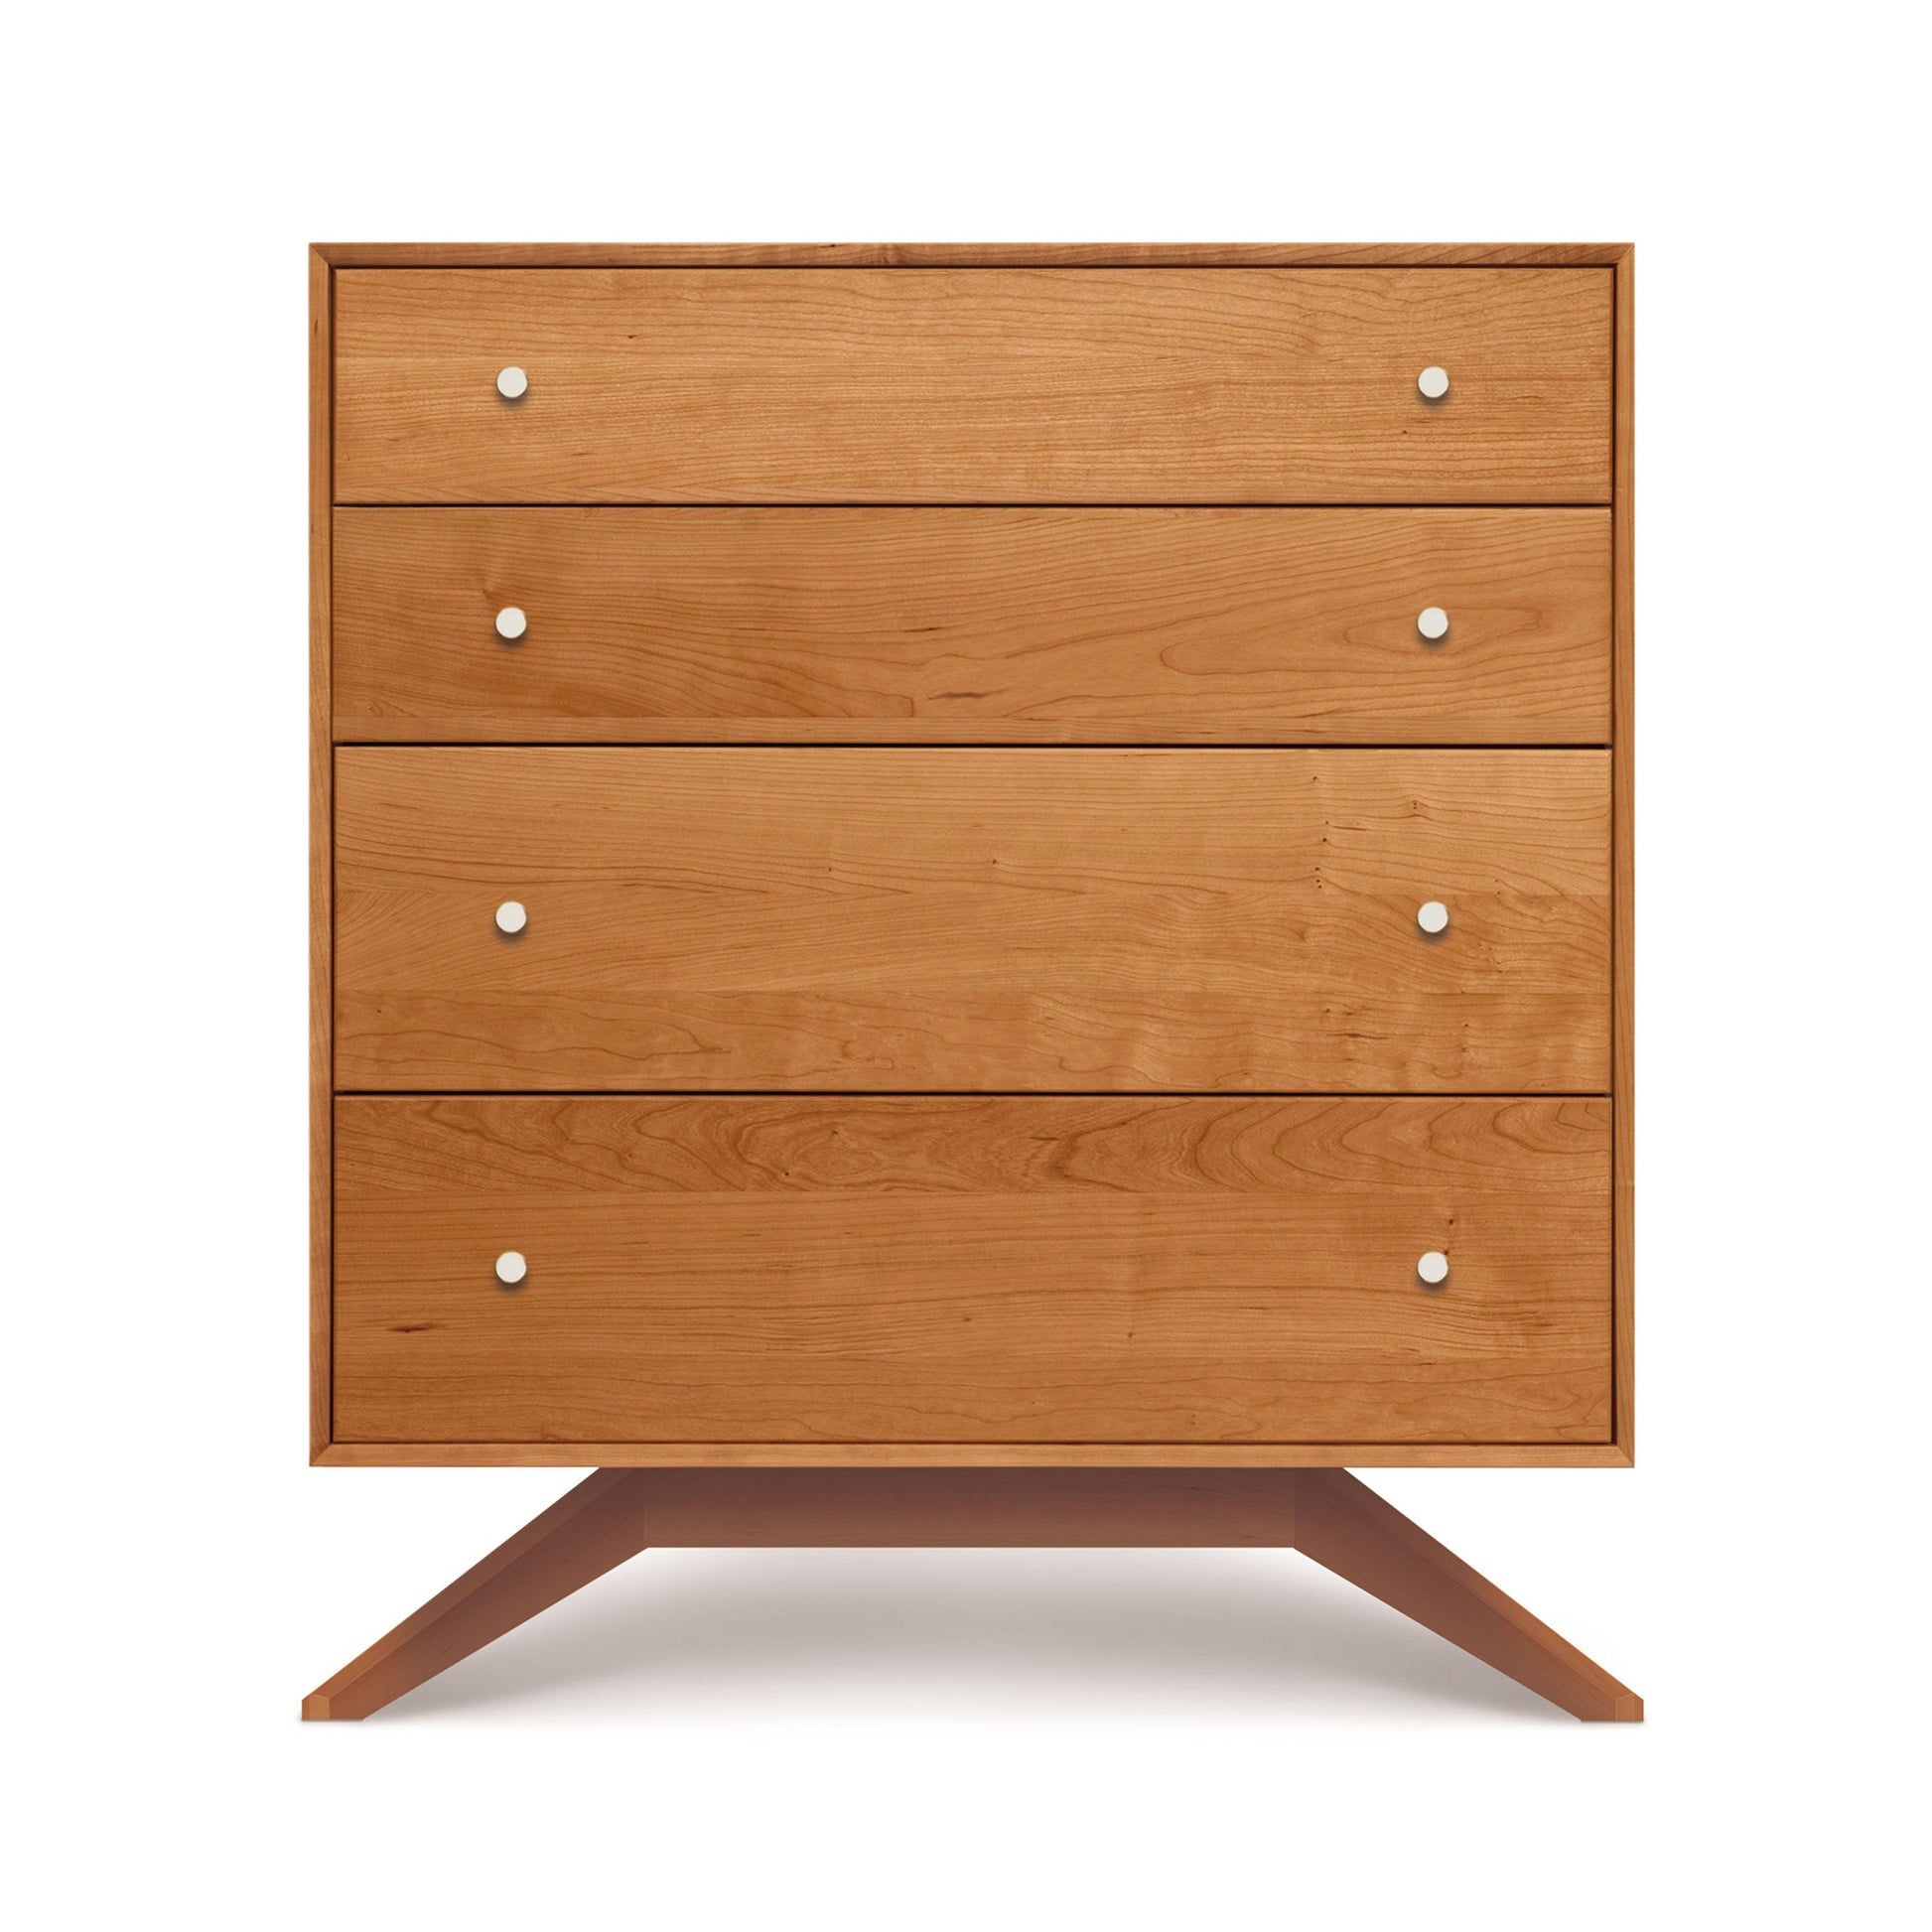 A hardwood Copeland Furniture Astrid 4-Drawer Chest with round white knobs, standing on angled legs against a white background.